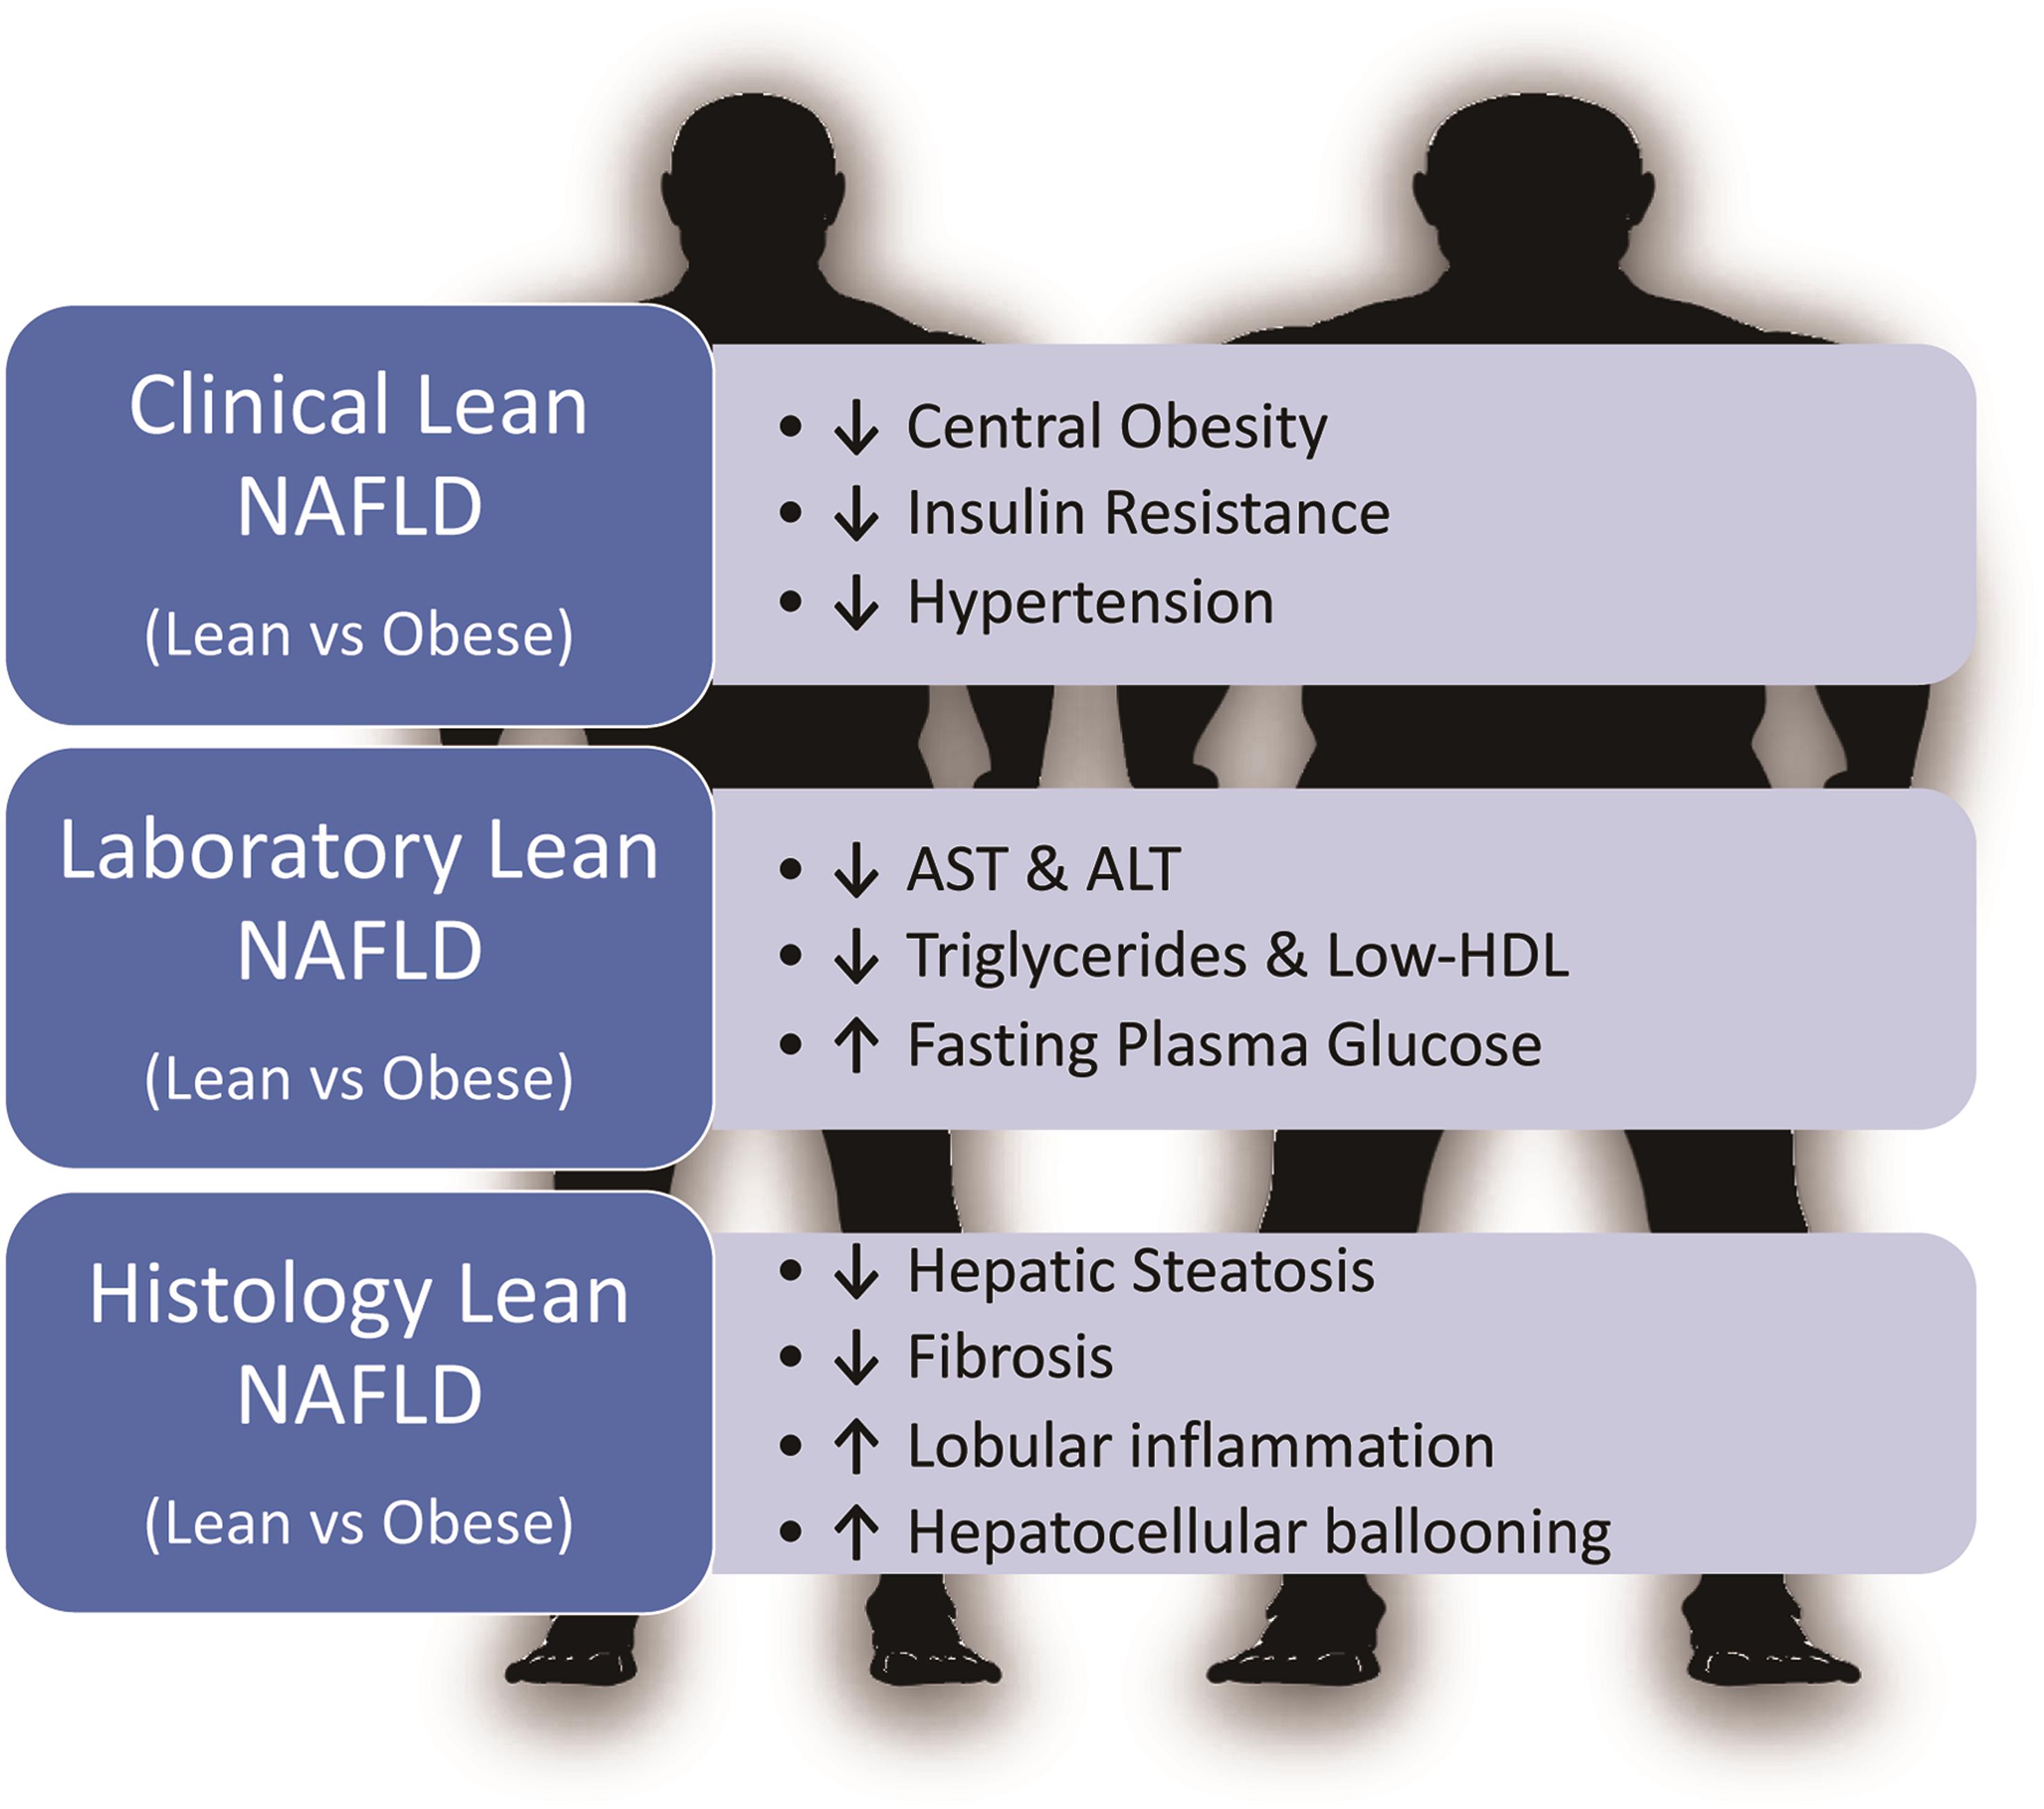 Comparison of clinical, laboratory, and histology in lean/nonobese NAFLD and obese NAFLD.